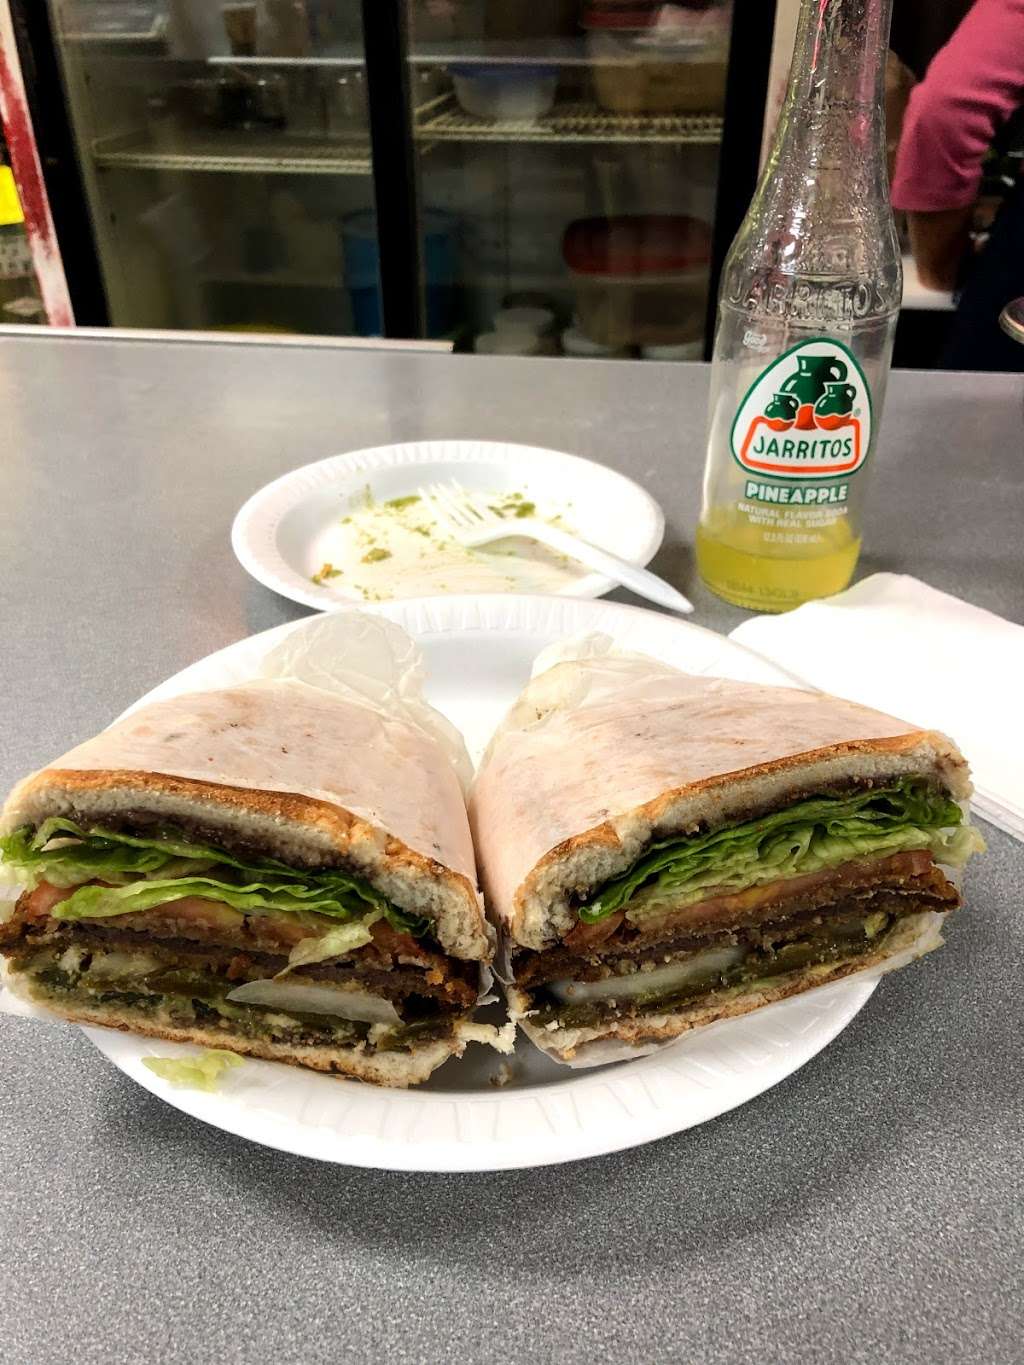 Tehuacan Deli Grocery | 1837 Westchester Ave, The Bronx, NY 10472, USA | Phone: (718) 597-0009